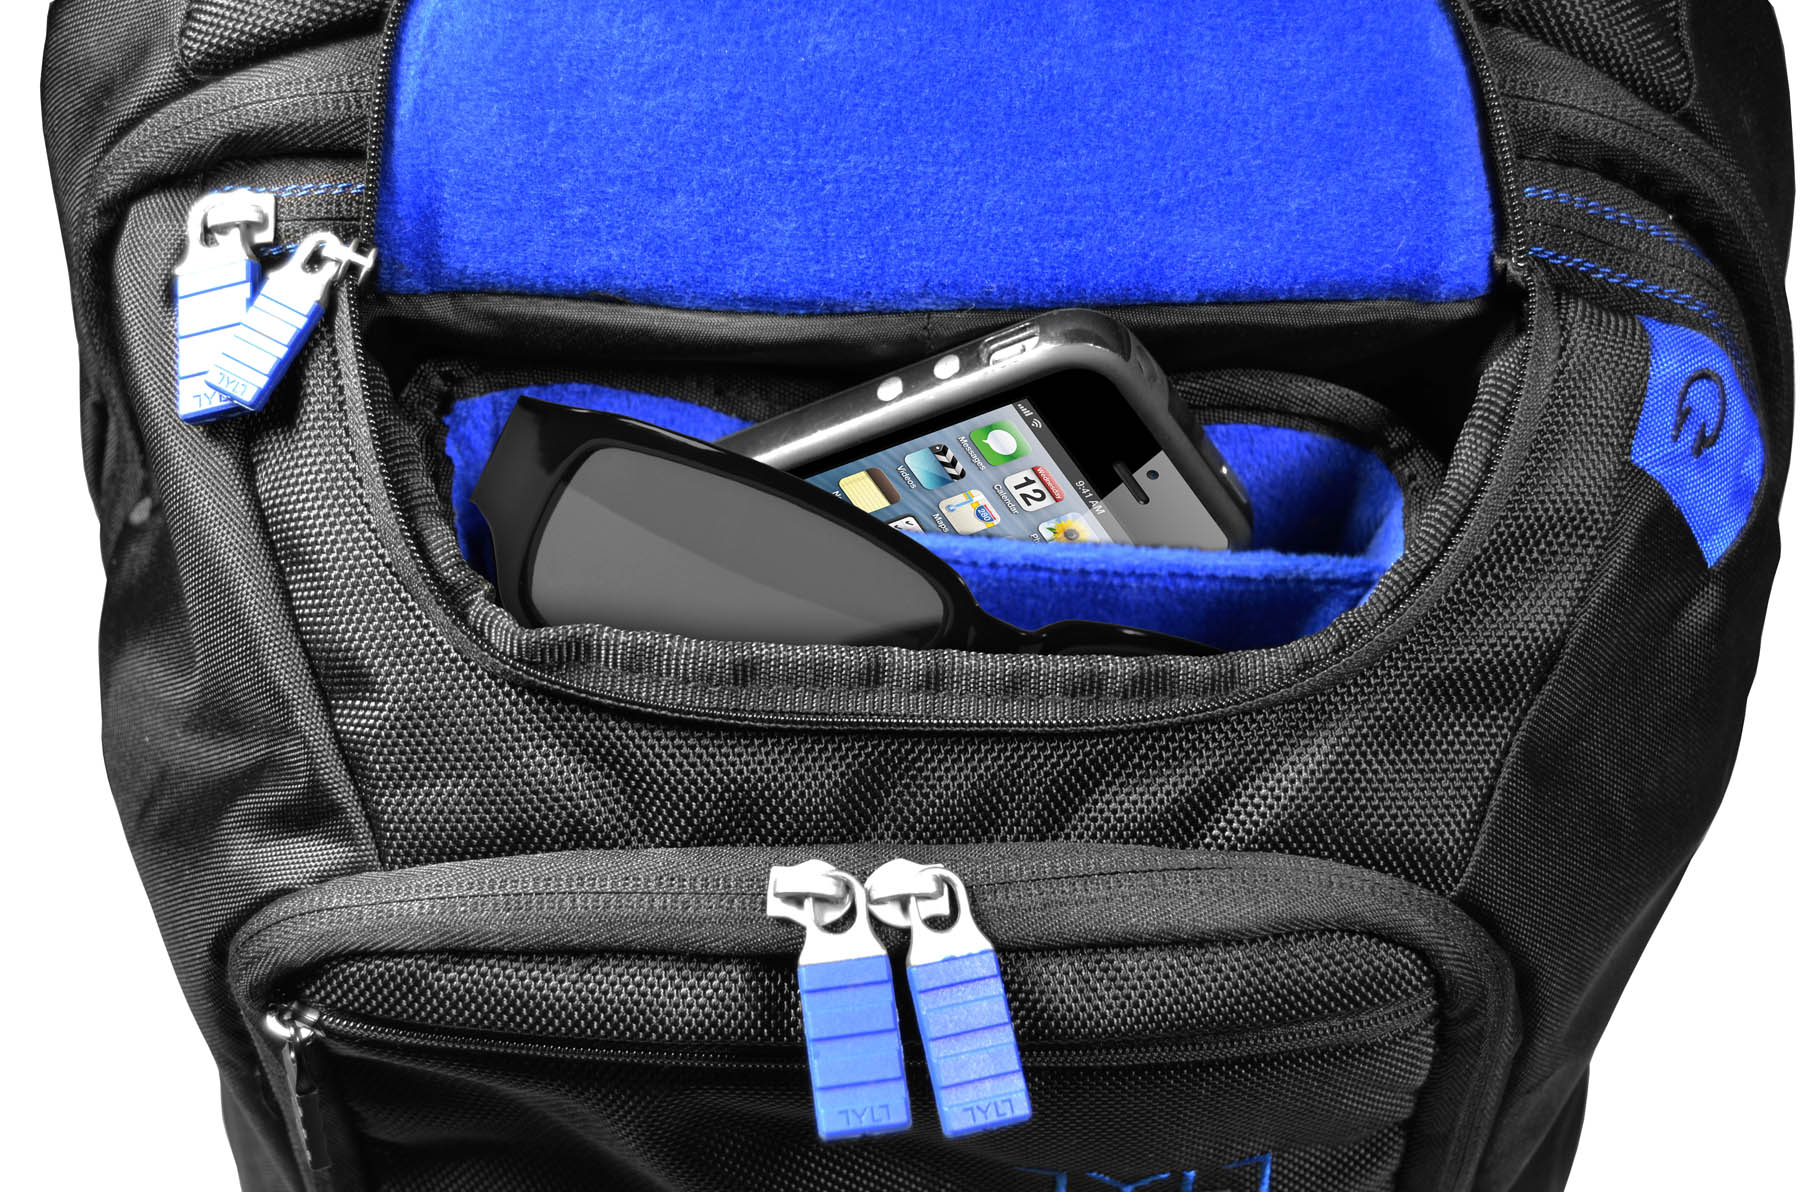 TYLT Energi+ Backpack Review: A Tech Backpack With Power